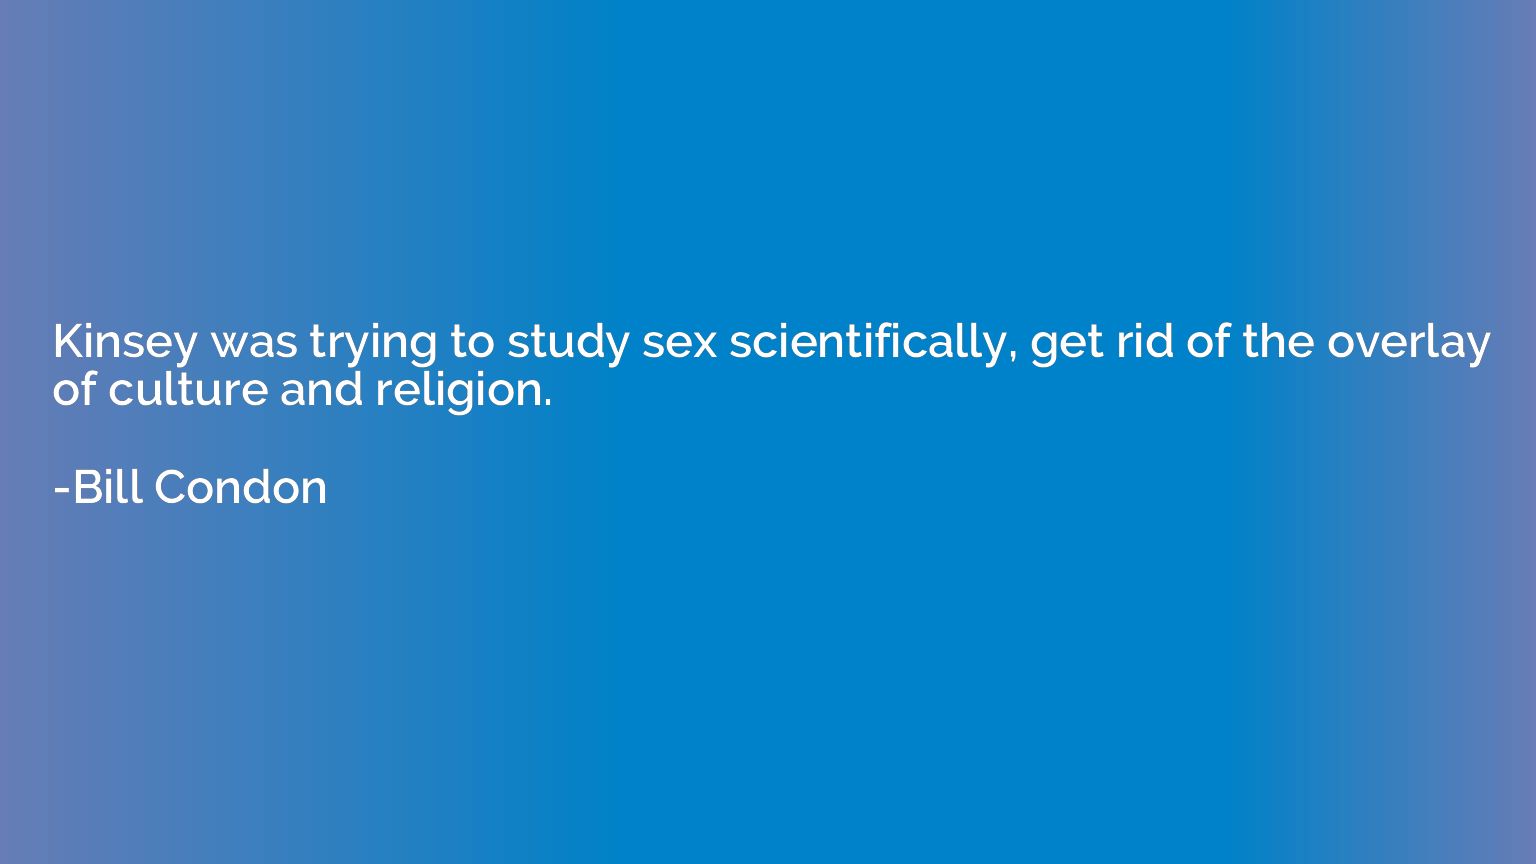 Kinsey was trying to study sex scientifically, get rid of th